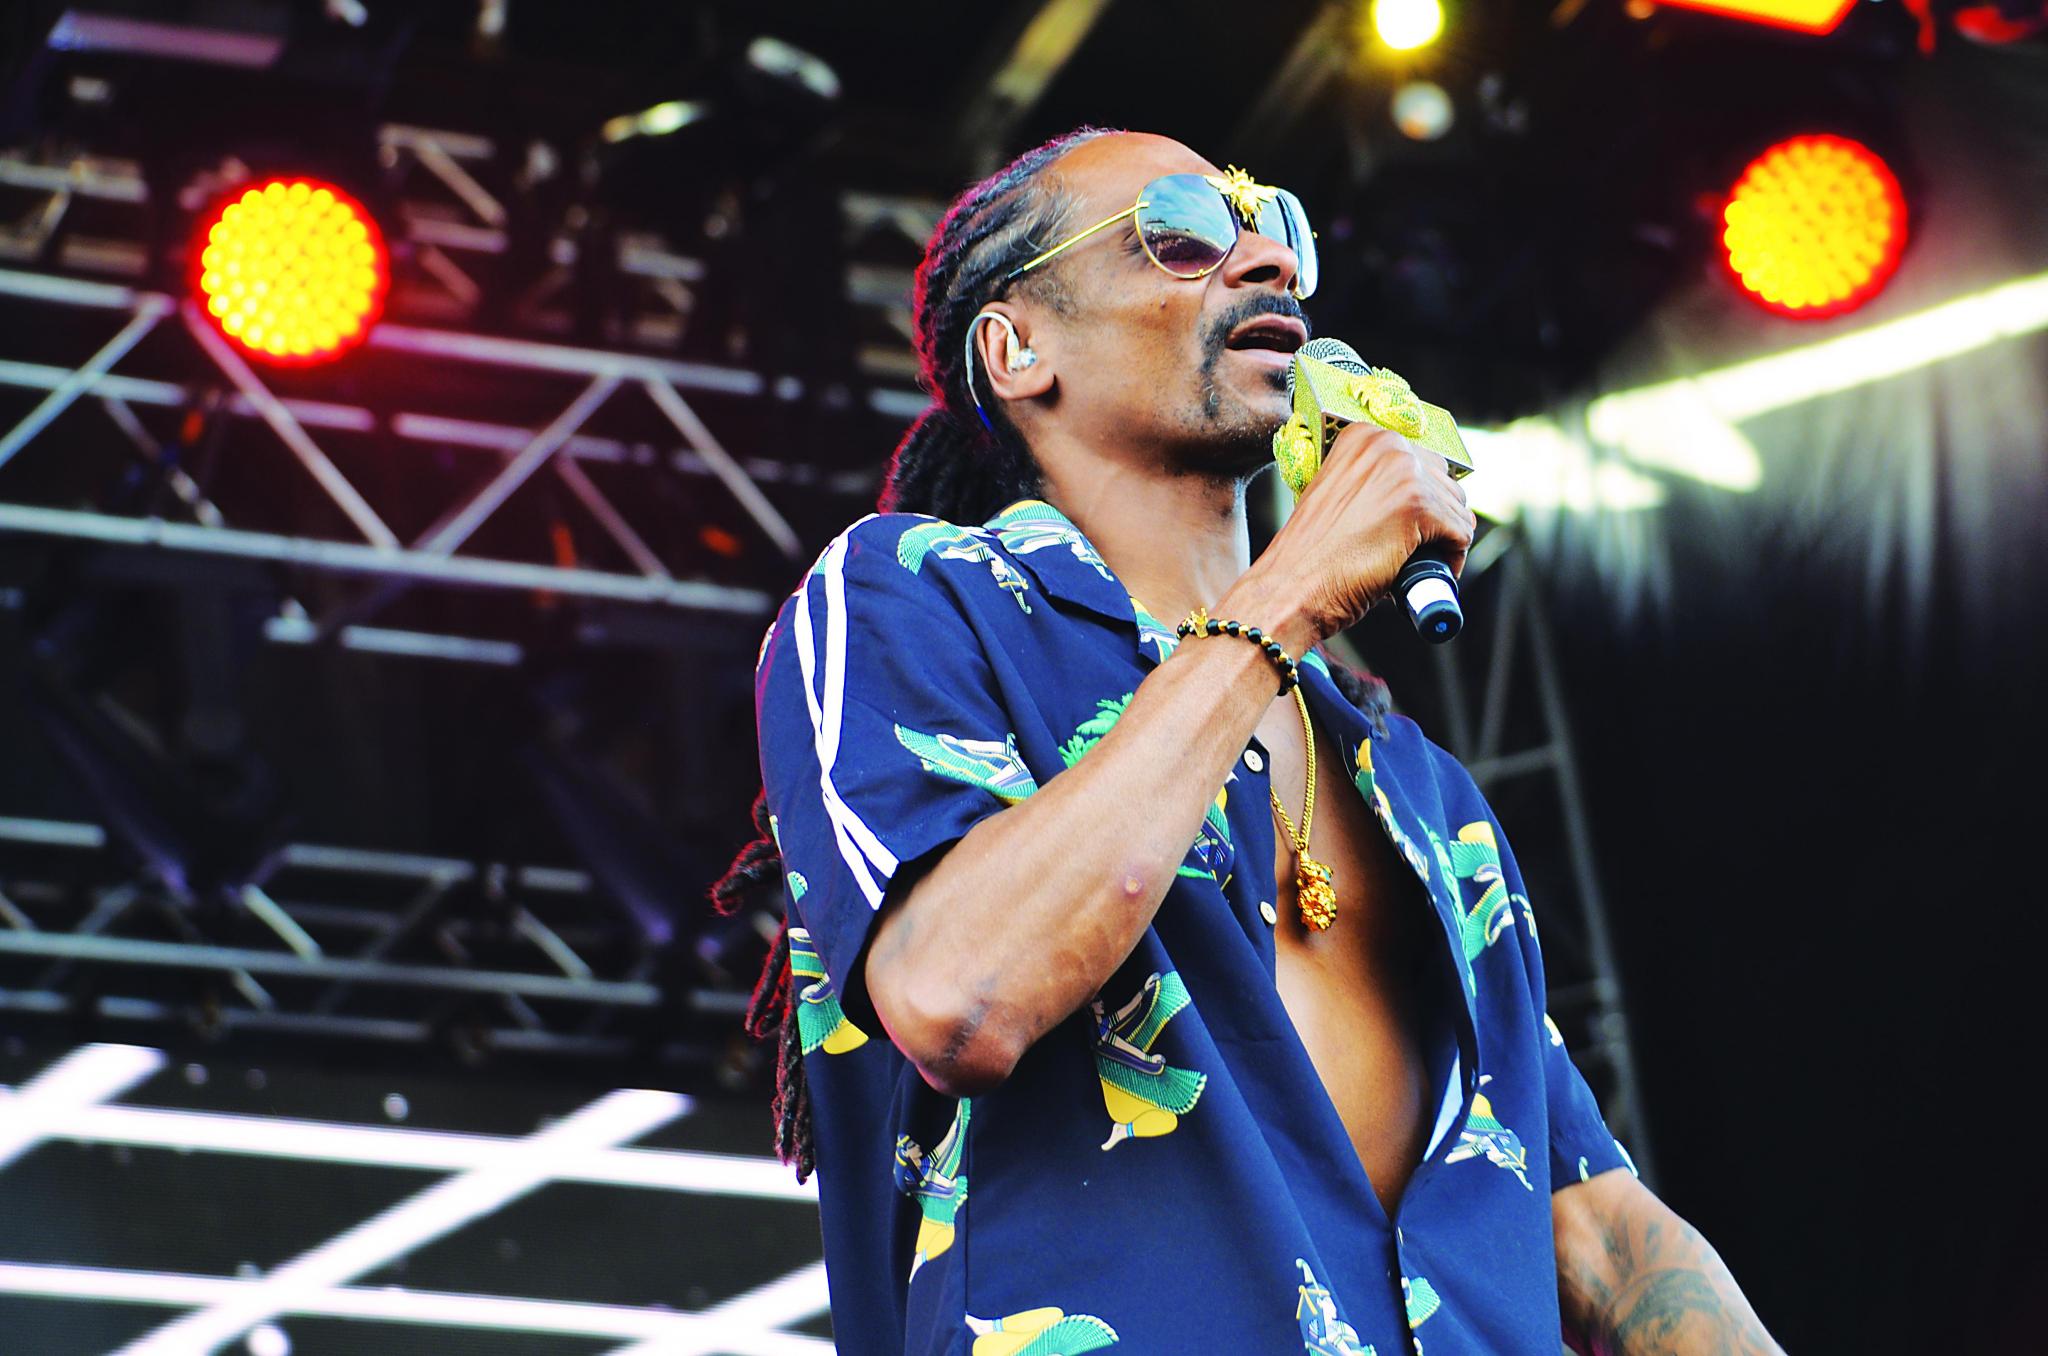 Snoop Dogg at the 2018 Float Festival in San Marcos, TX. Photo by Toy Mendez